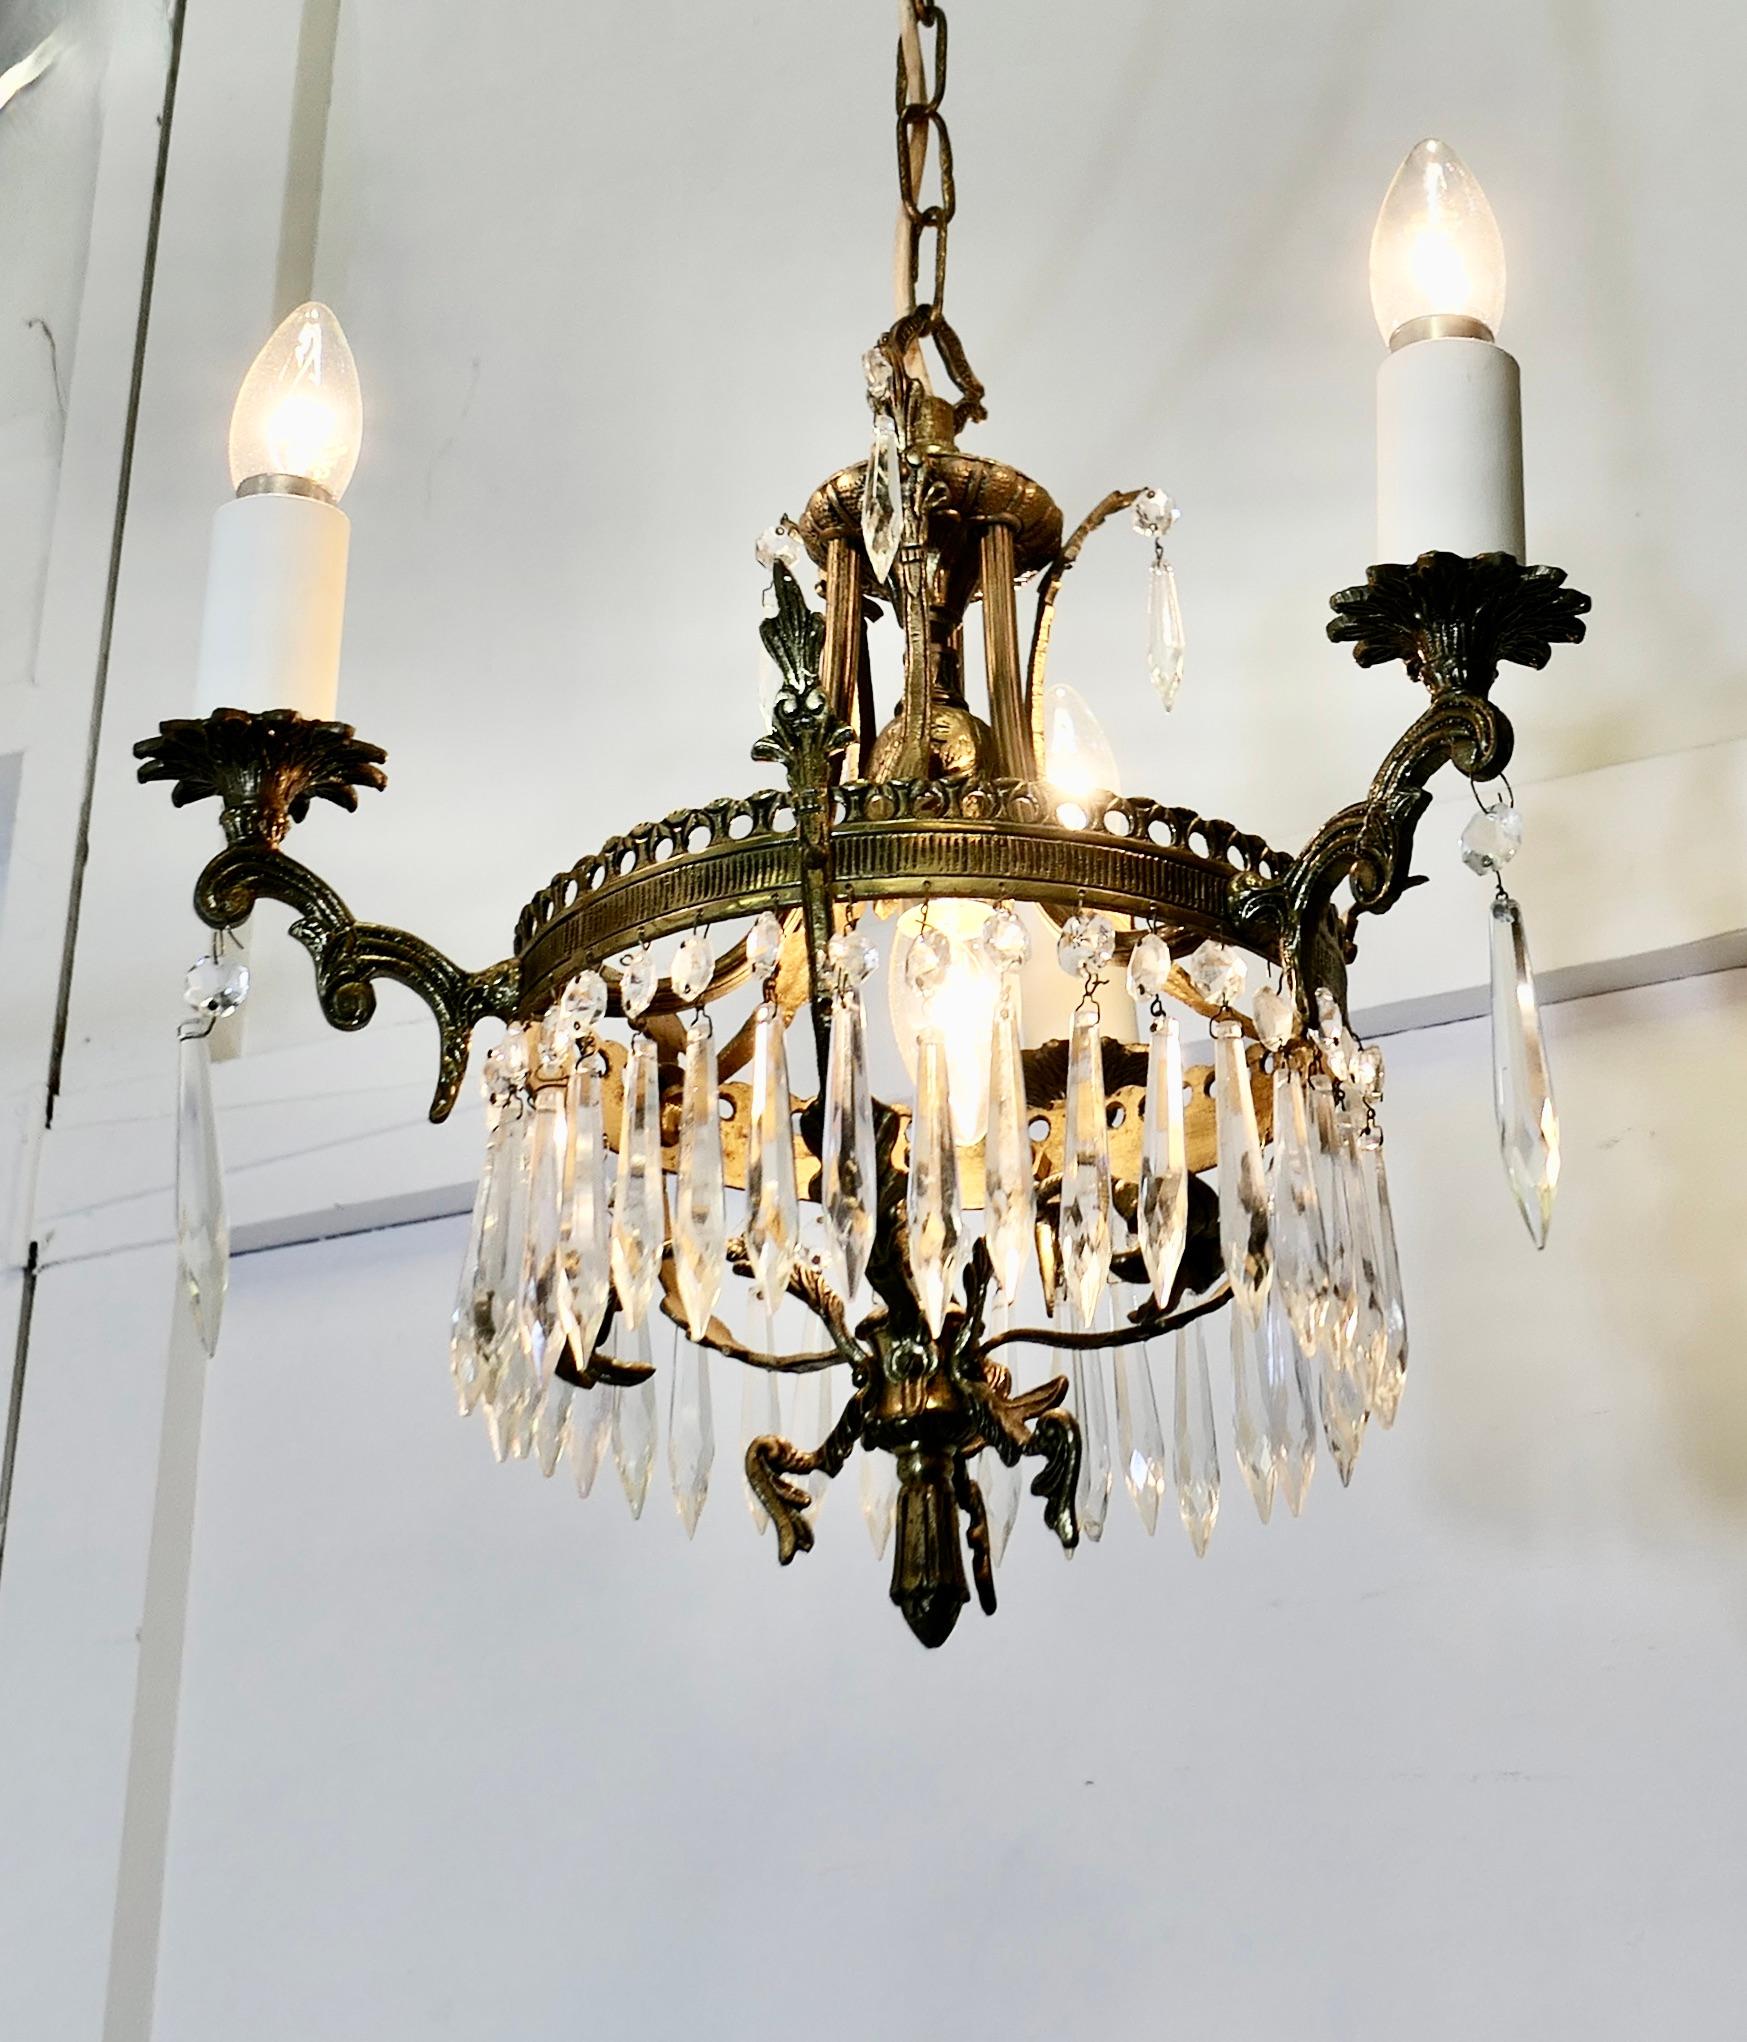 French Provincial A Stunning 3 Branch Brass and Crystal Chandelier   This is excellent quality  For Sale